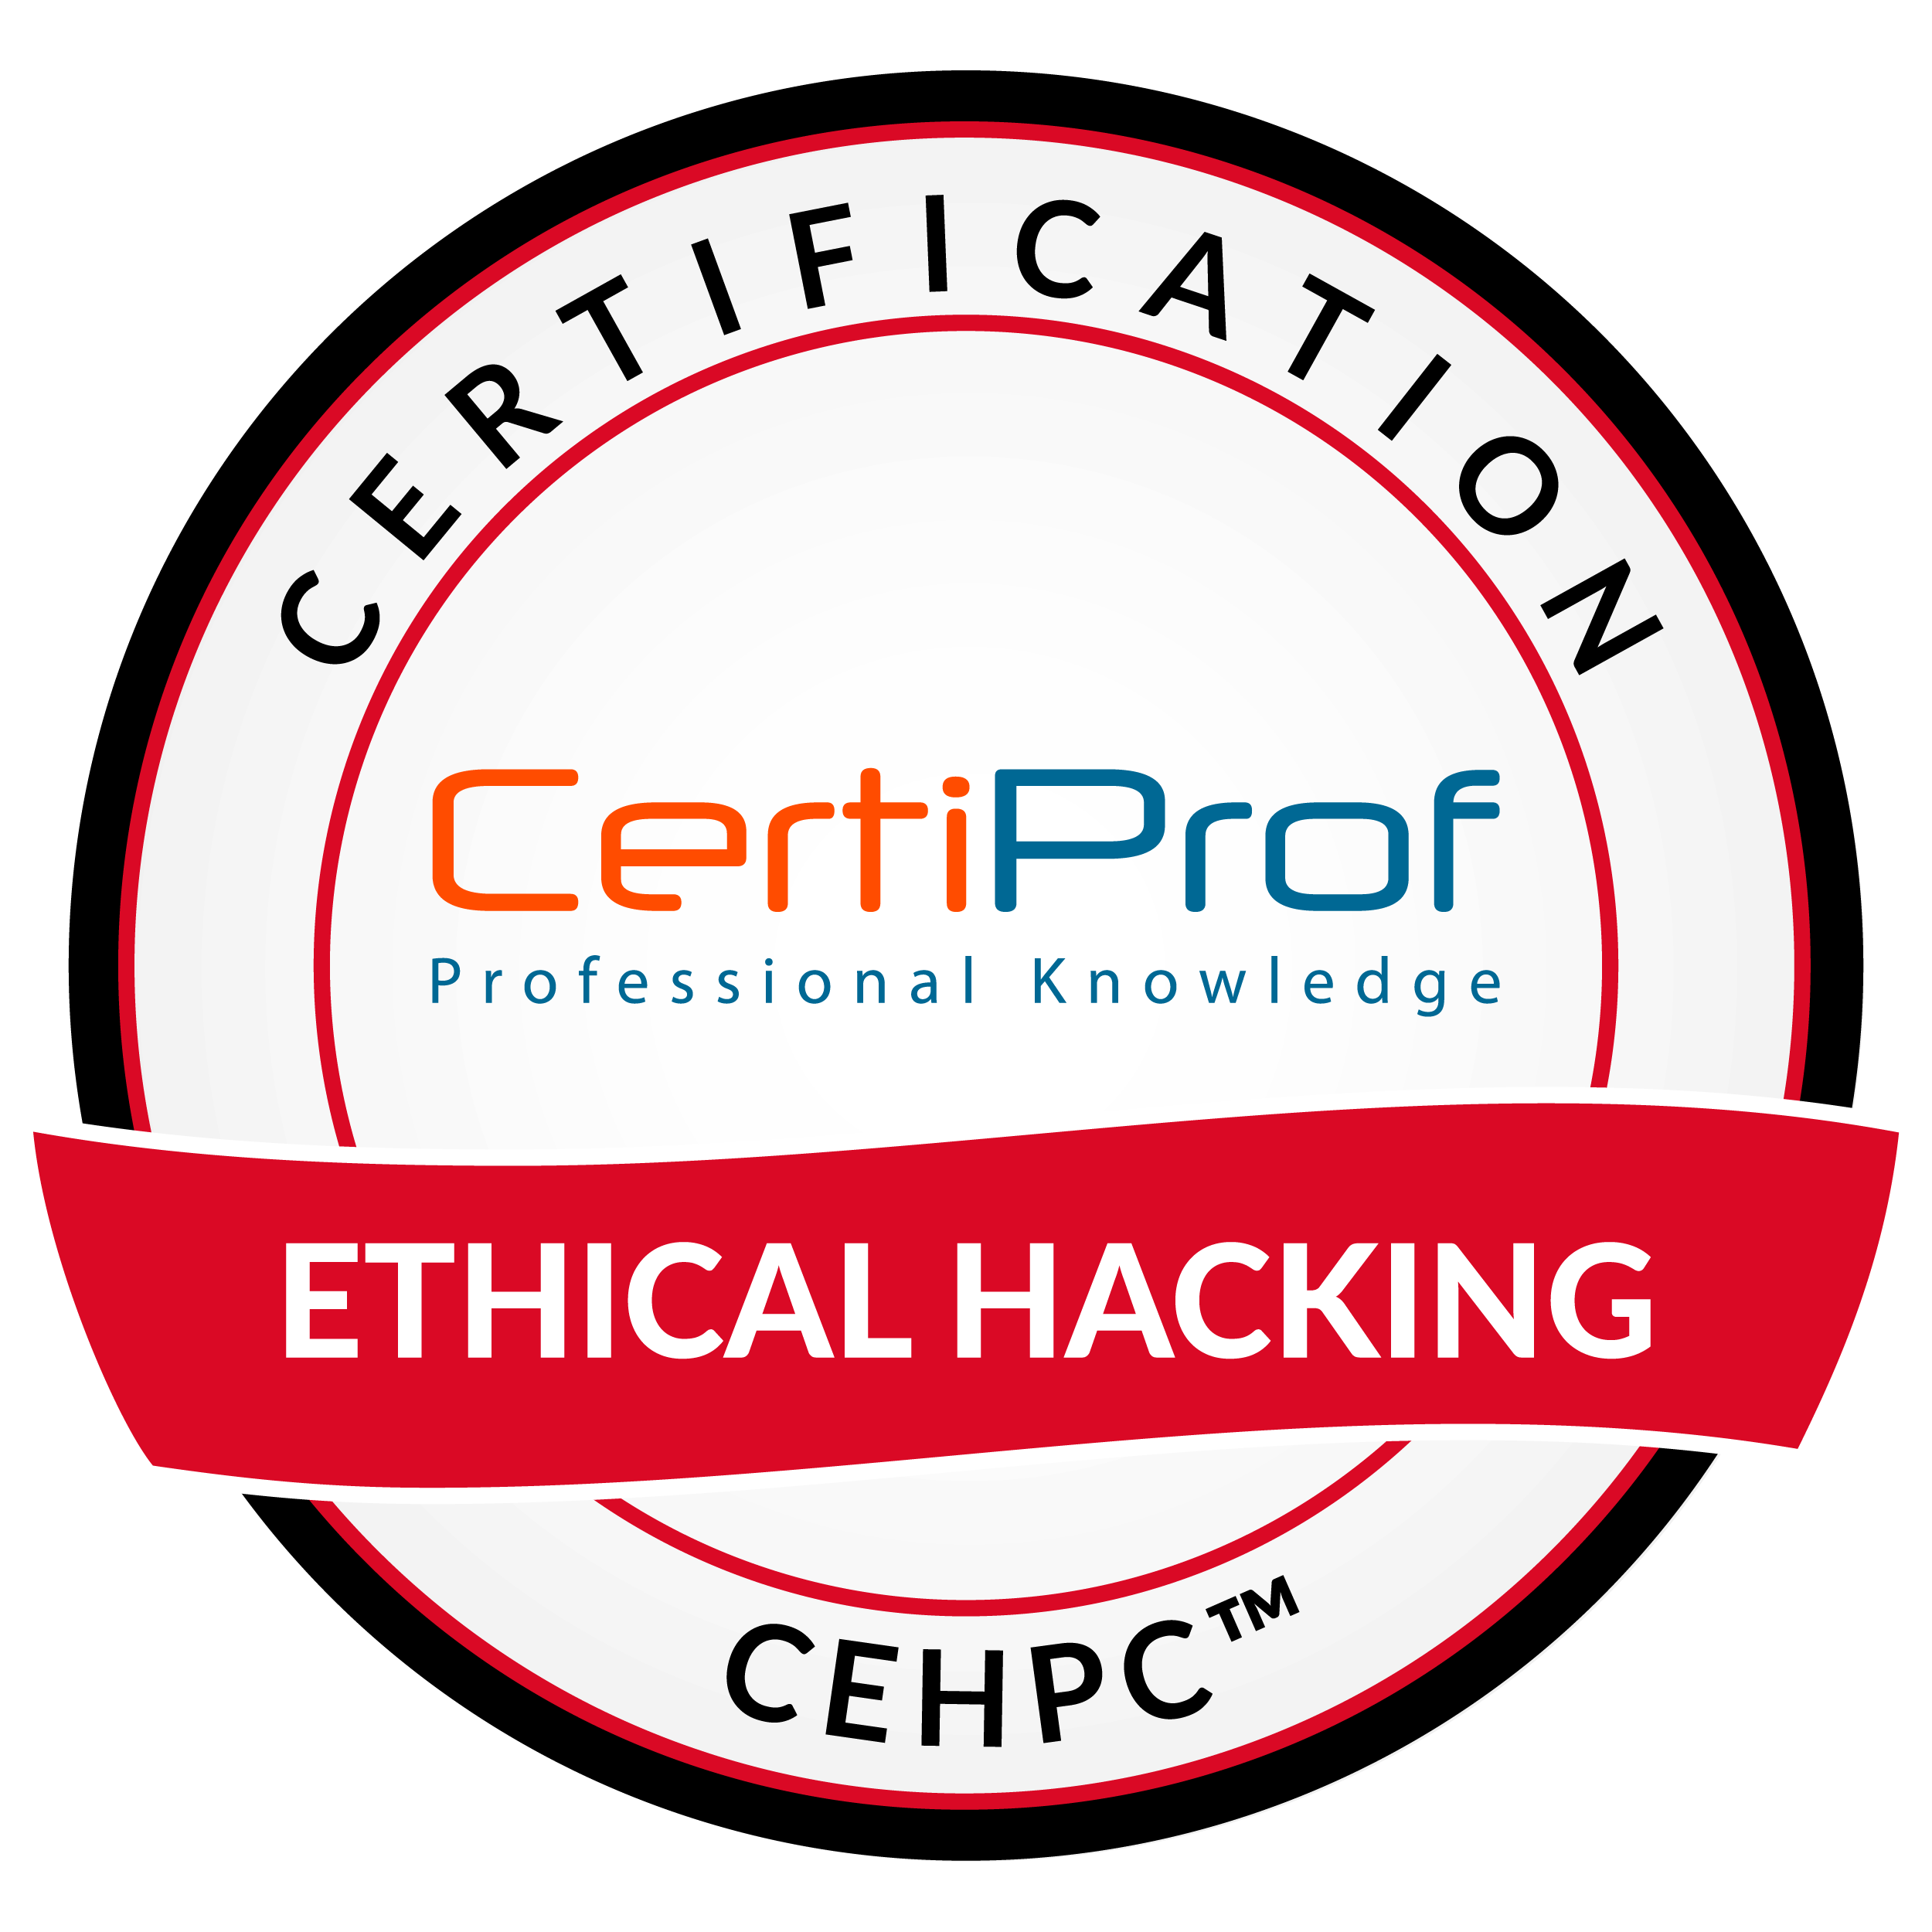 Ethical Hacking CEH Professional certification